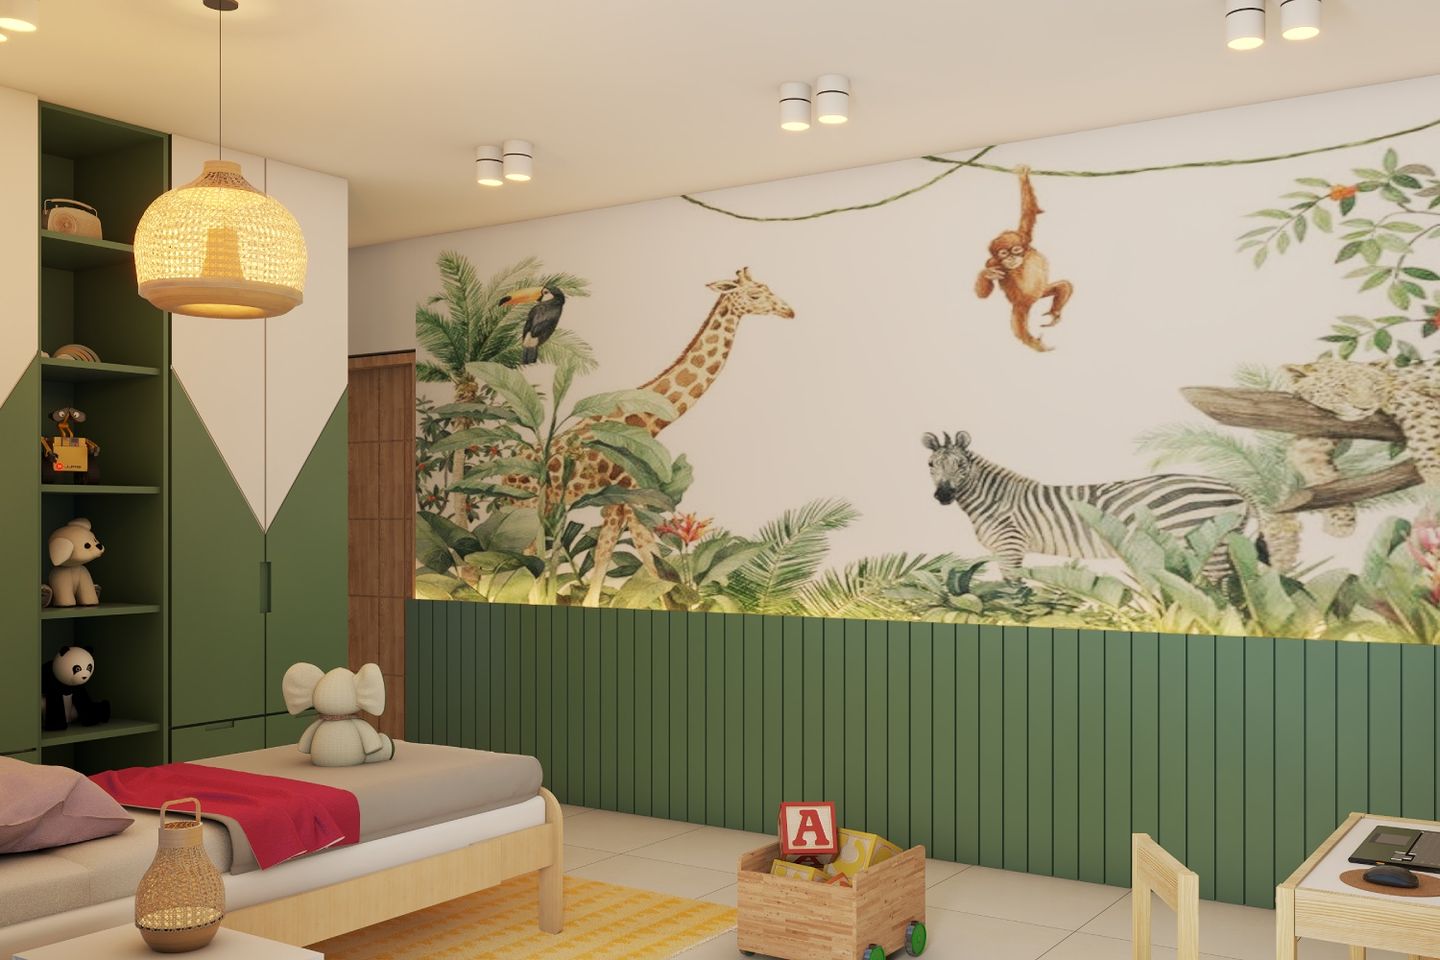 Forest-Themed Wall Design With A Wallpaper And Green Panels - Livspace